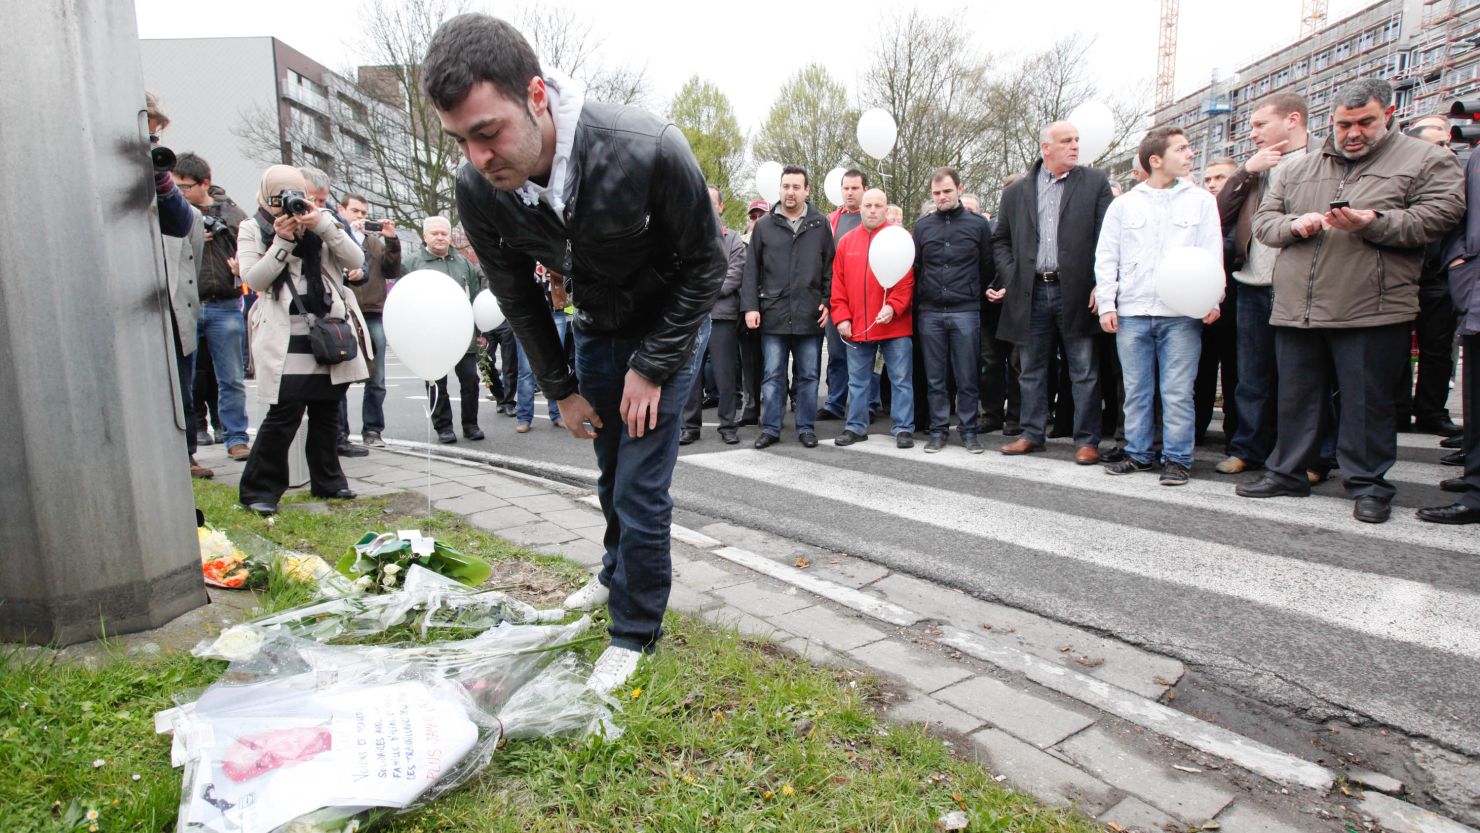 People lay flowers at the site in Brussels, Belgium where a transport worker was beaten to death on April 7.